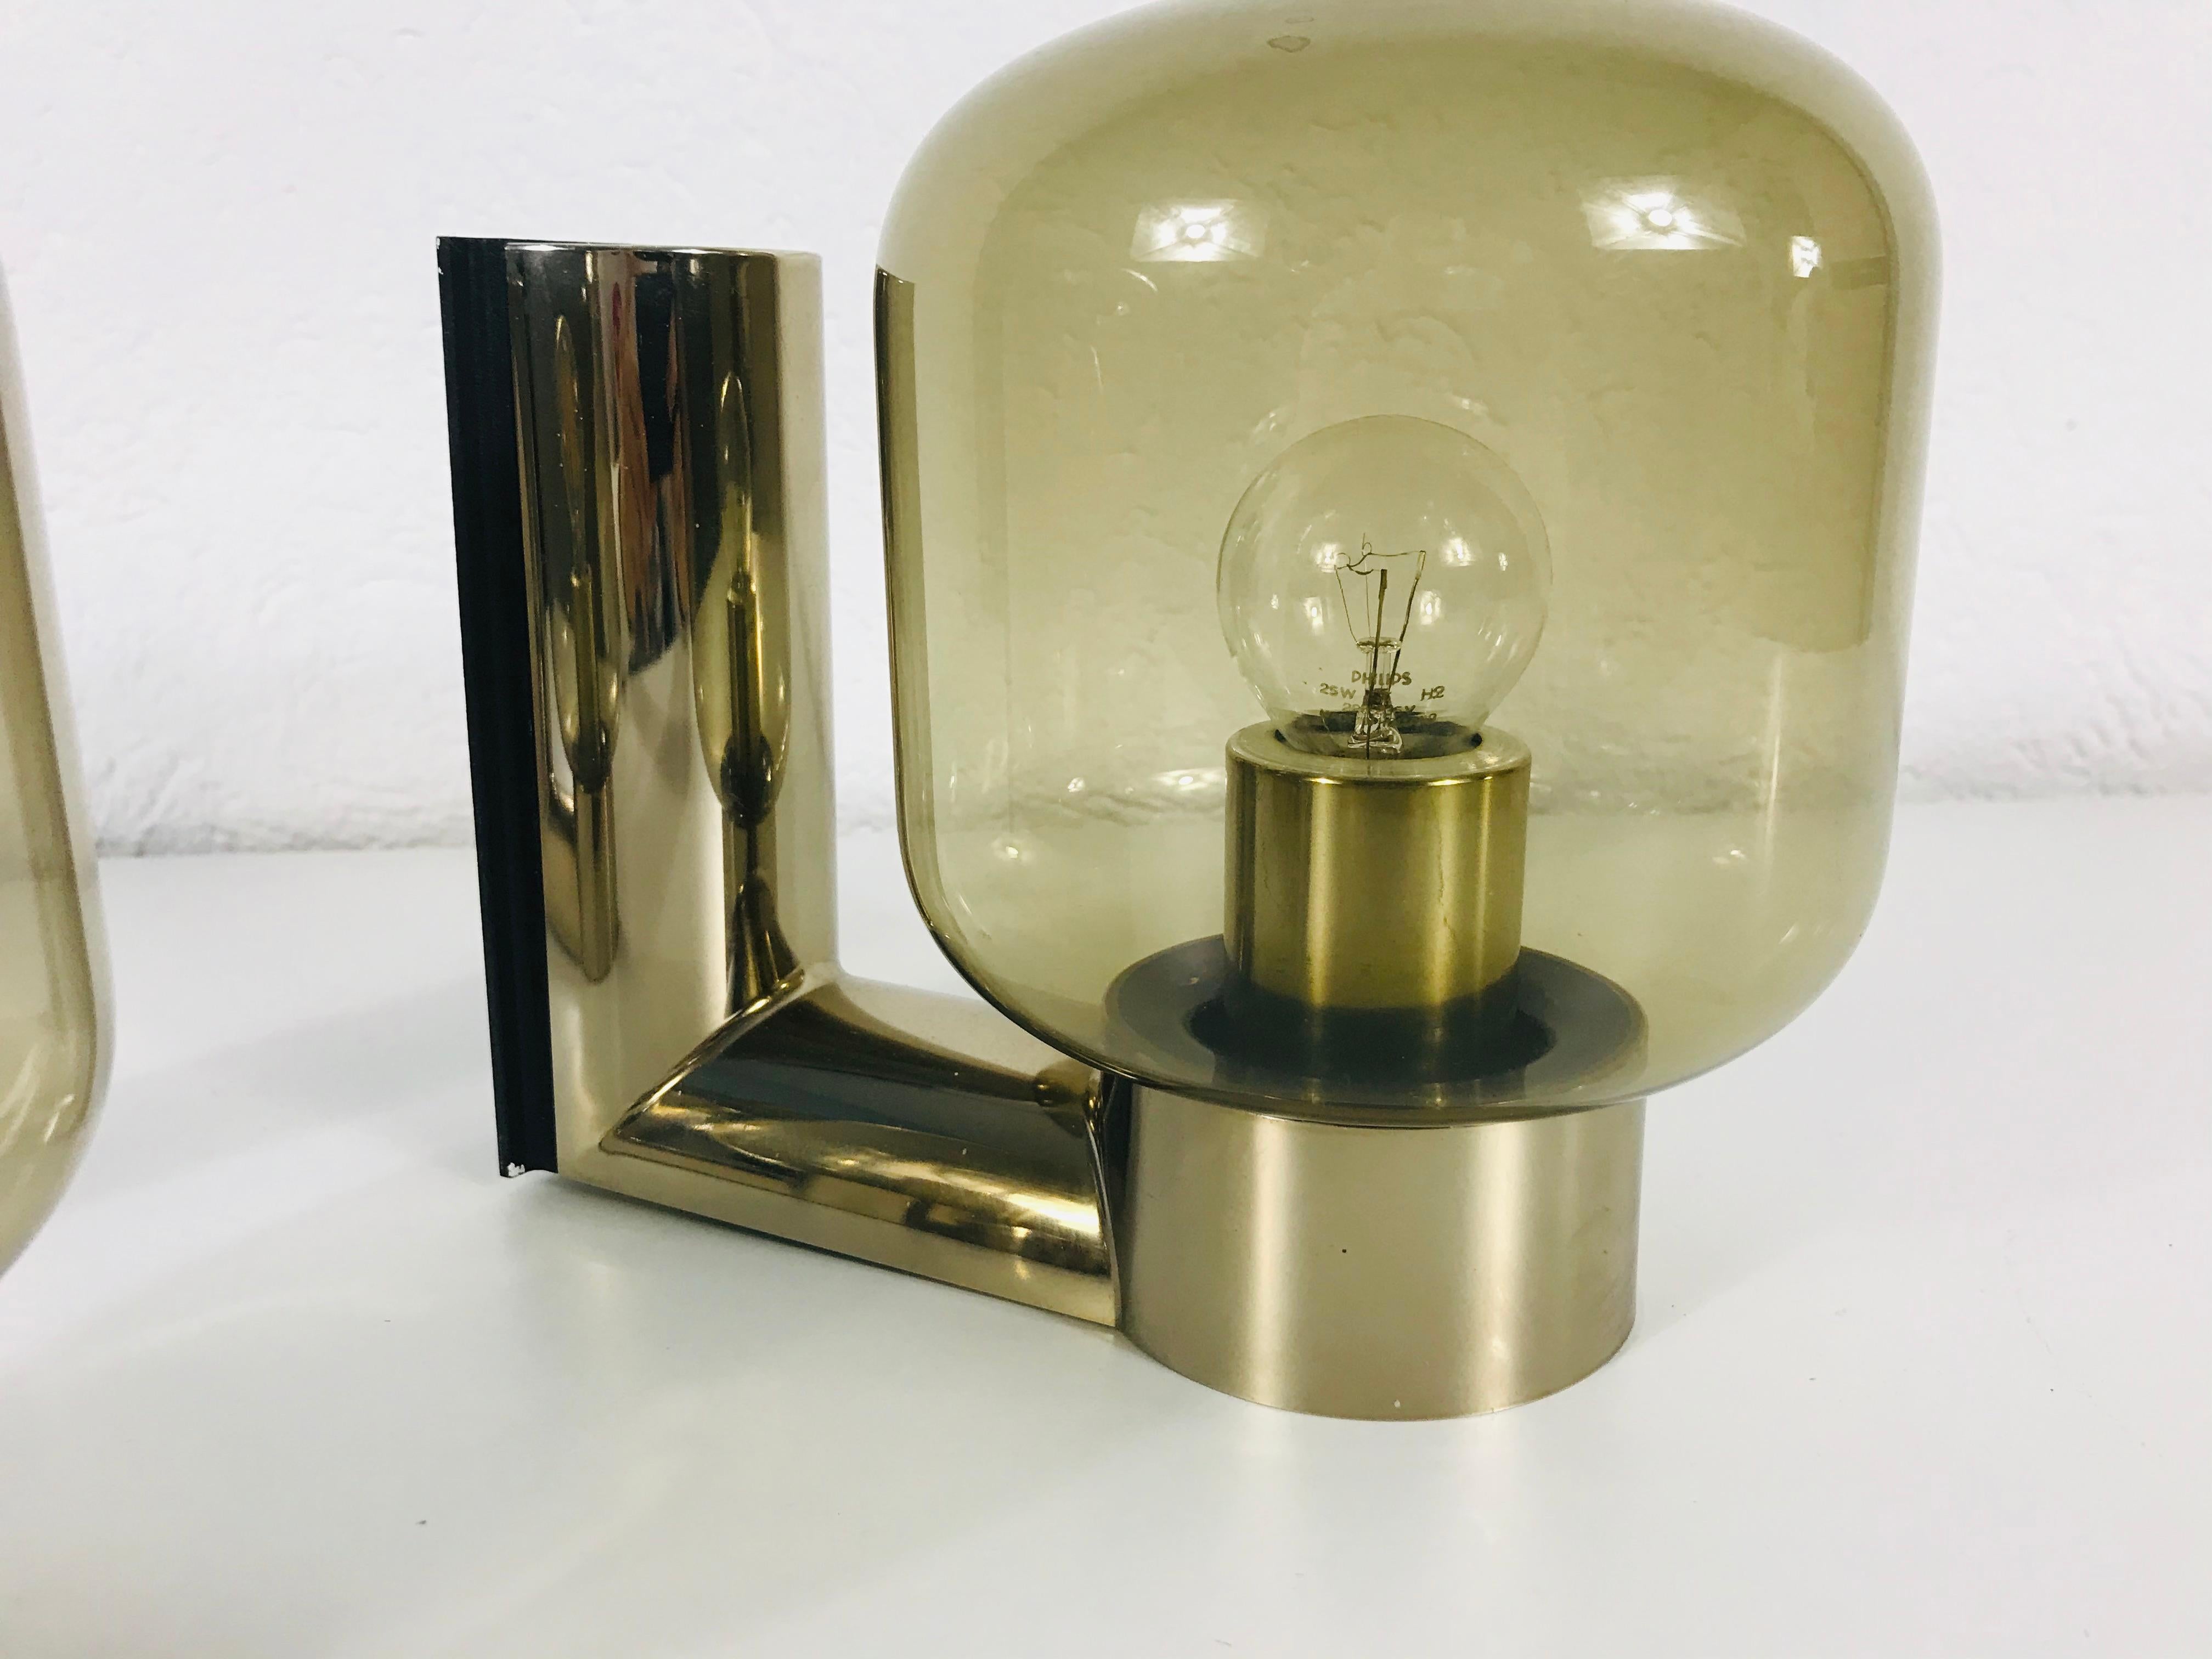 Pair of Rare Wall Lights by Motoko Ishii for Staff Leuchten, 1970 In Excellent Condition For Sale In Hagenbach, DE